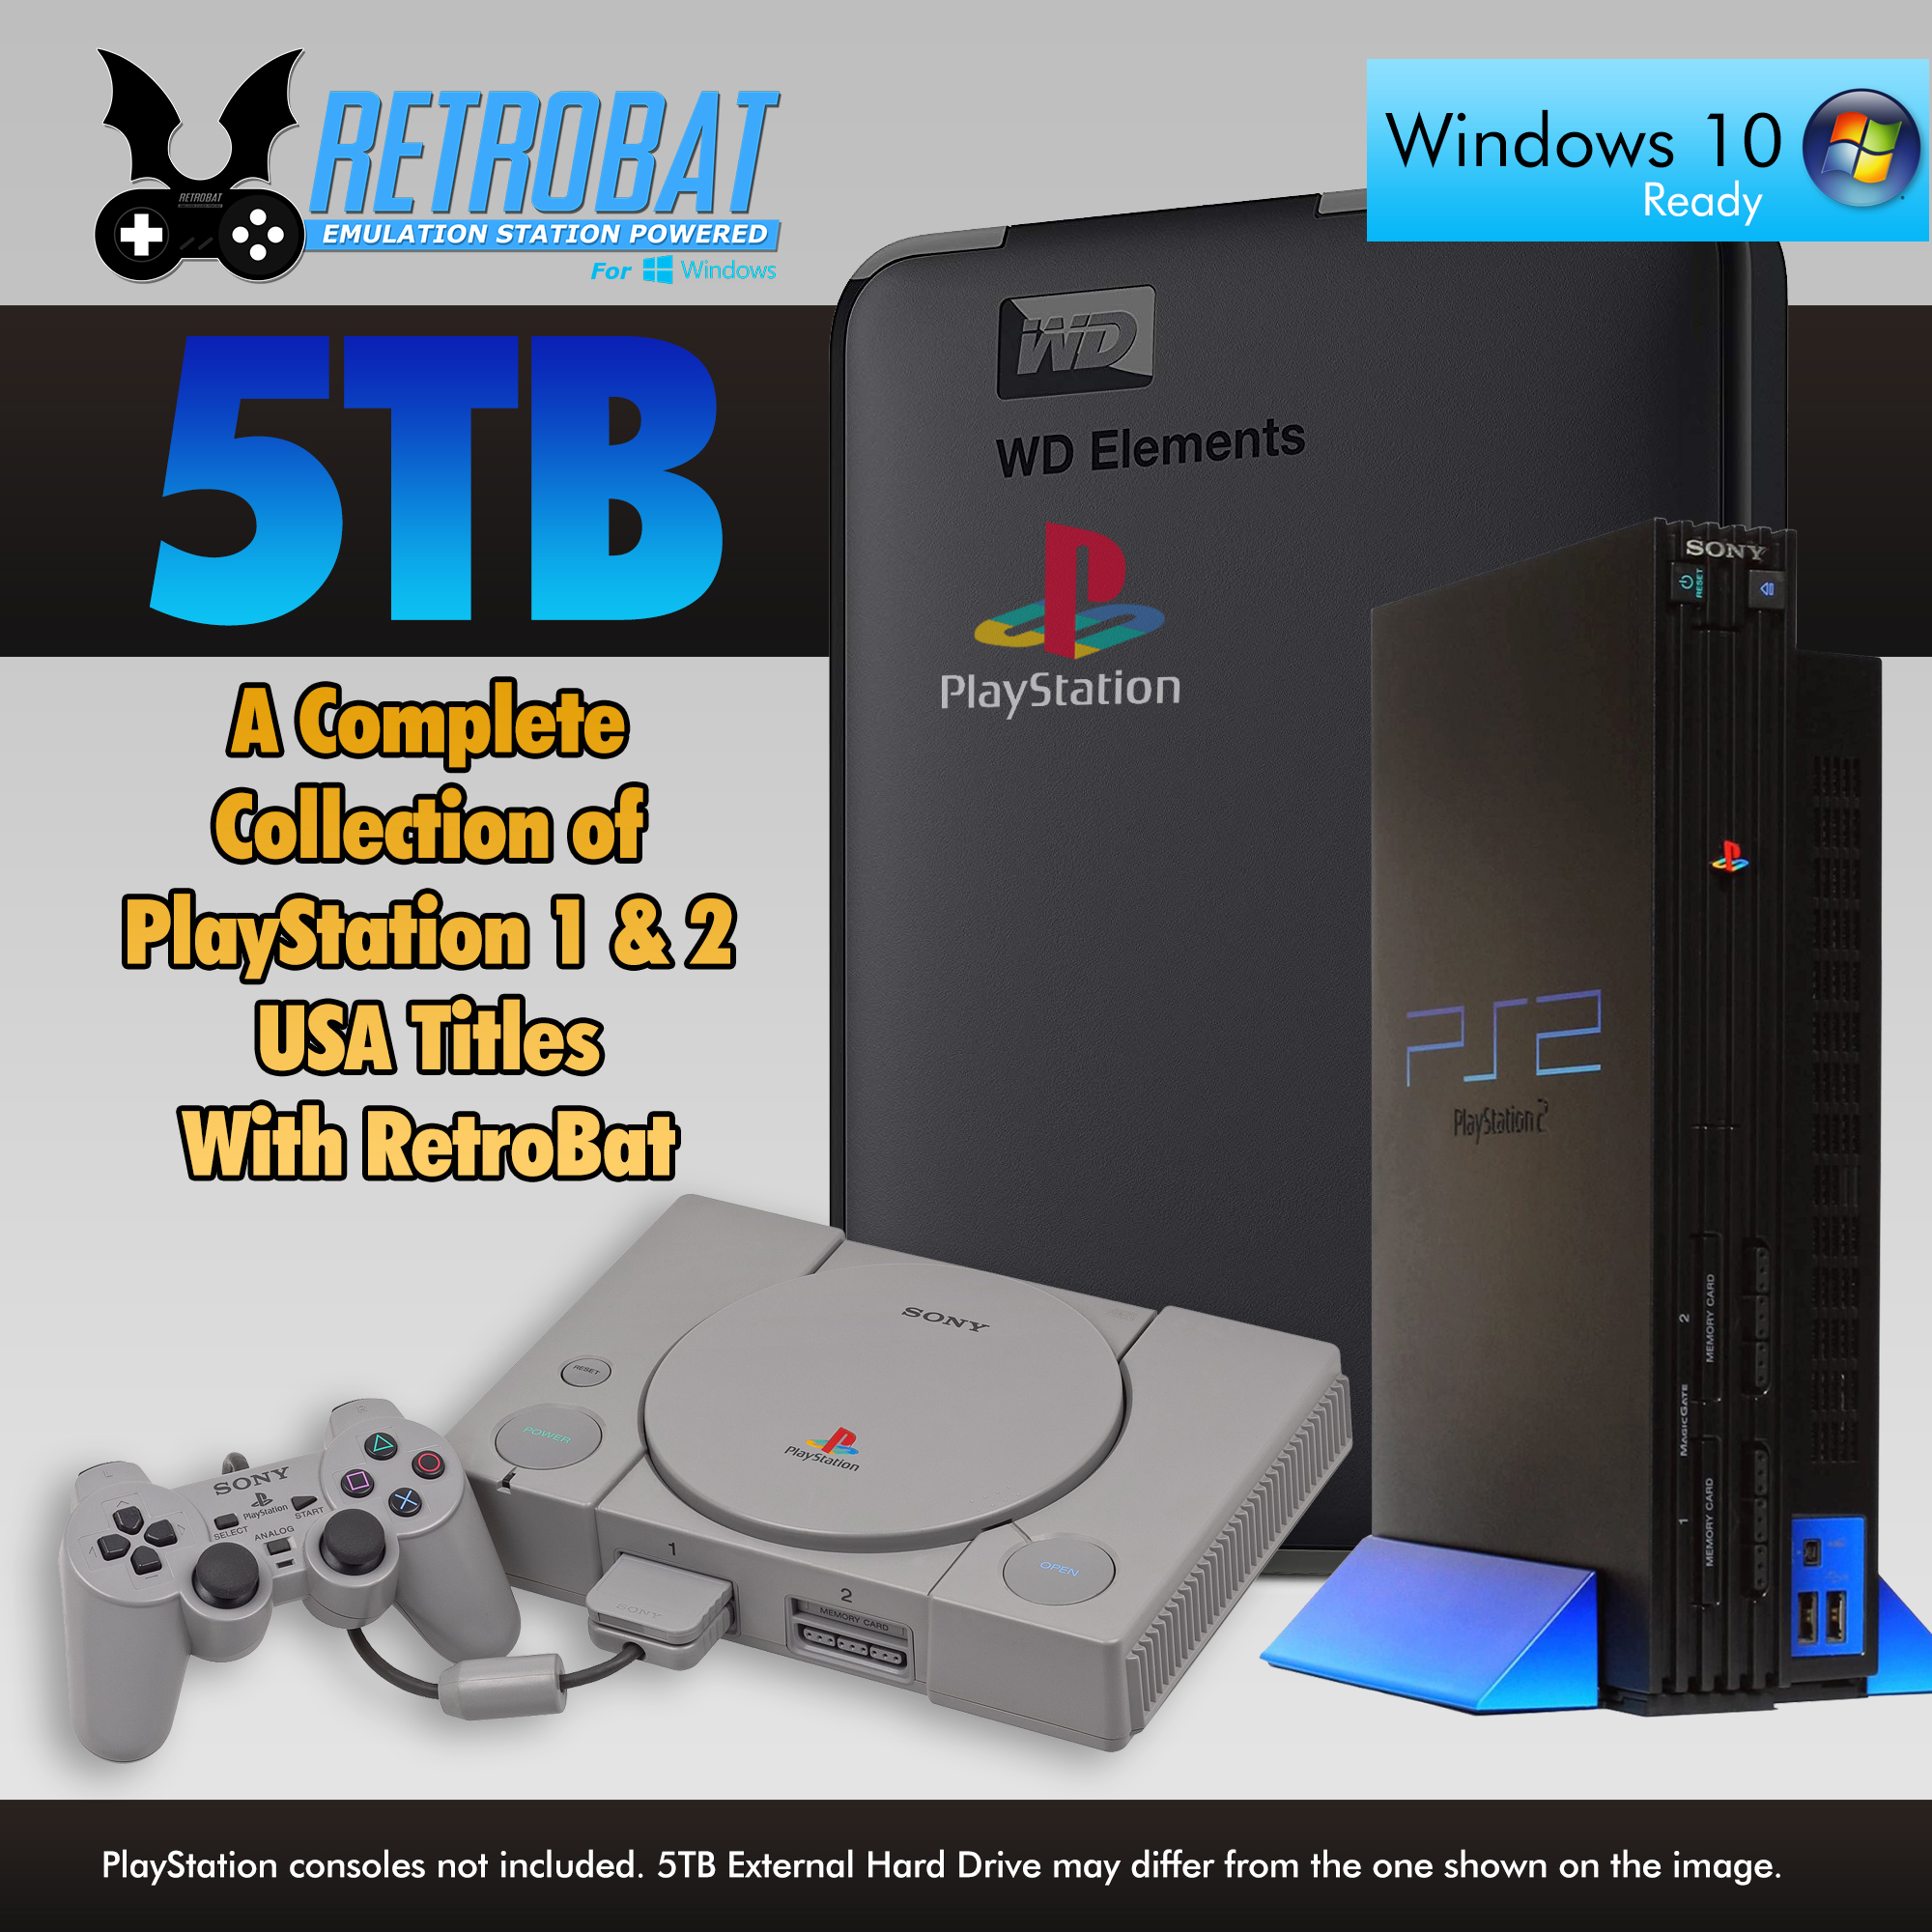 PlayStation 1 & 2 5TB External Hard Drive USA Collection For Windows with  RetroBat - RetroMini Store